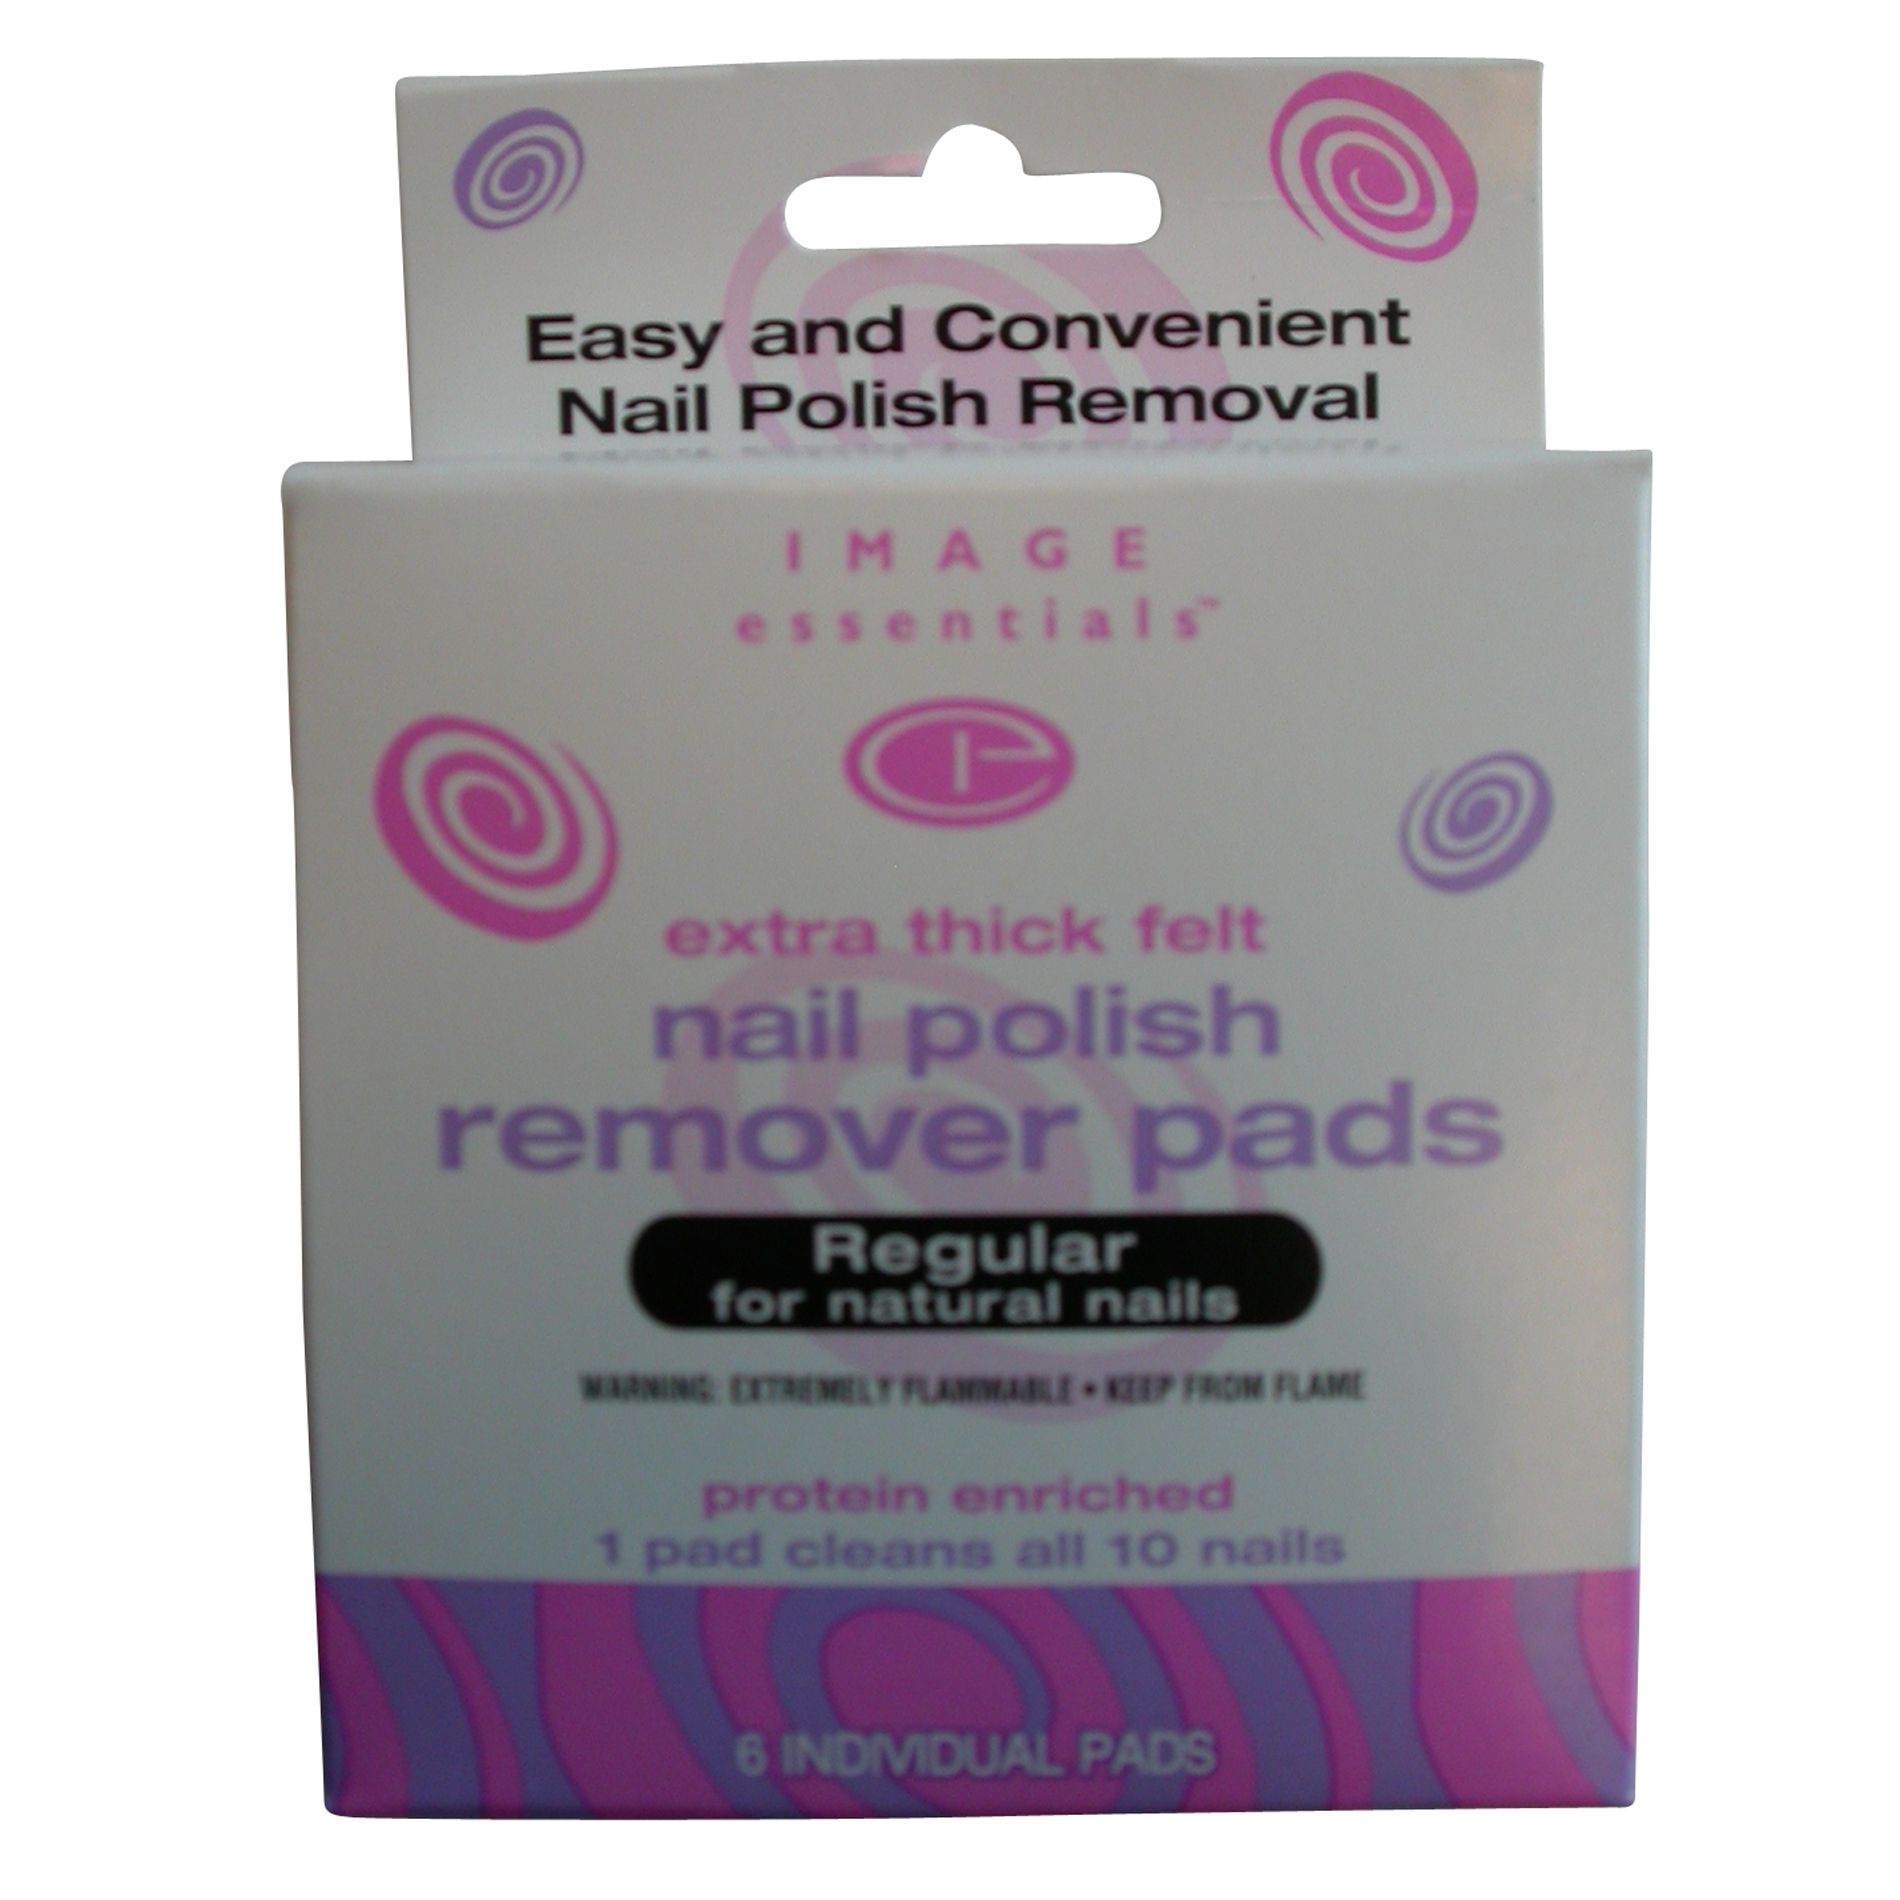 Image Essentials Nail Polish Remover Pads Regular Acetone 6 Count